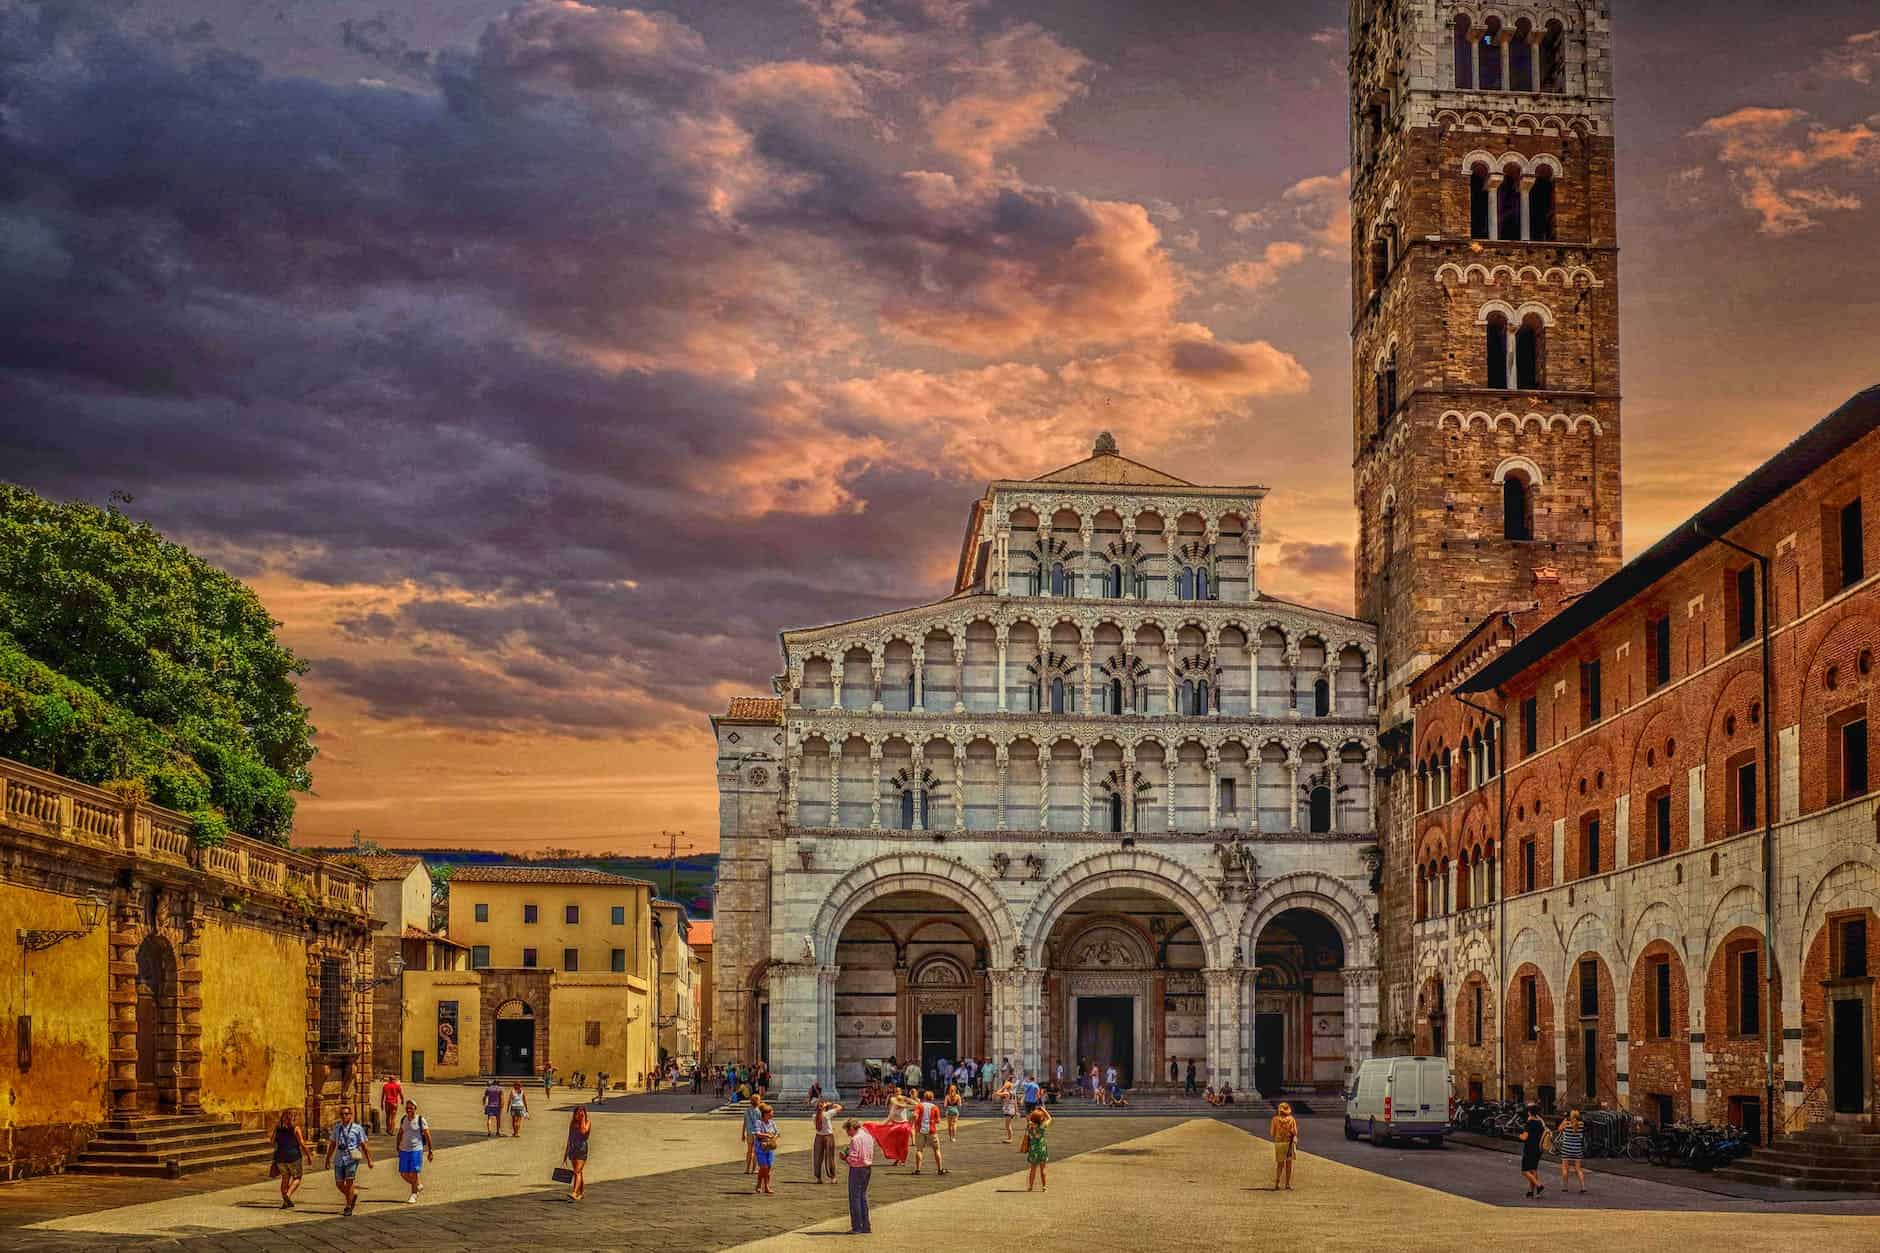 photo of the saint martin cathedral in lucca italy